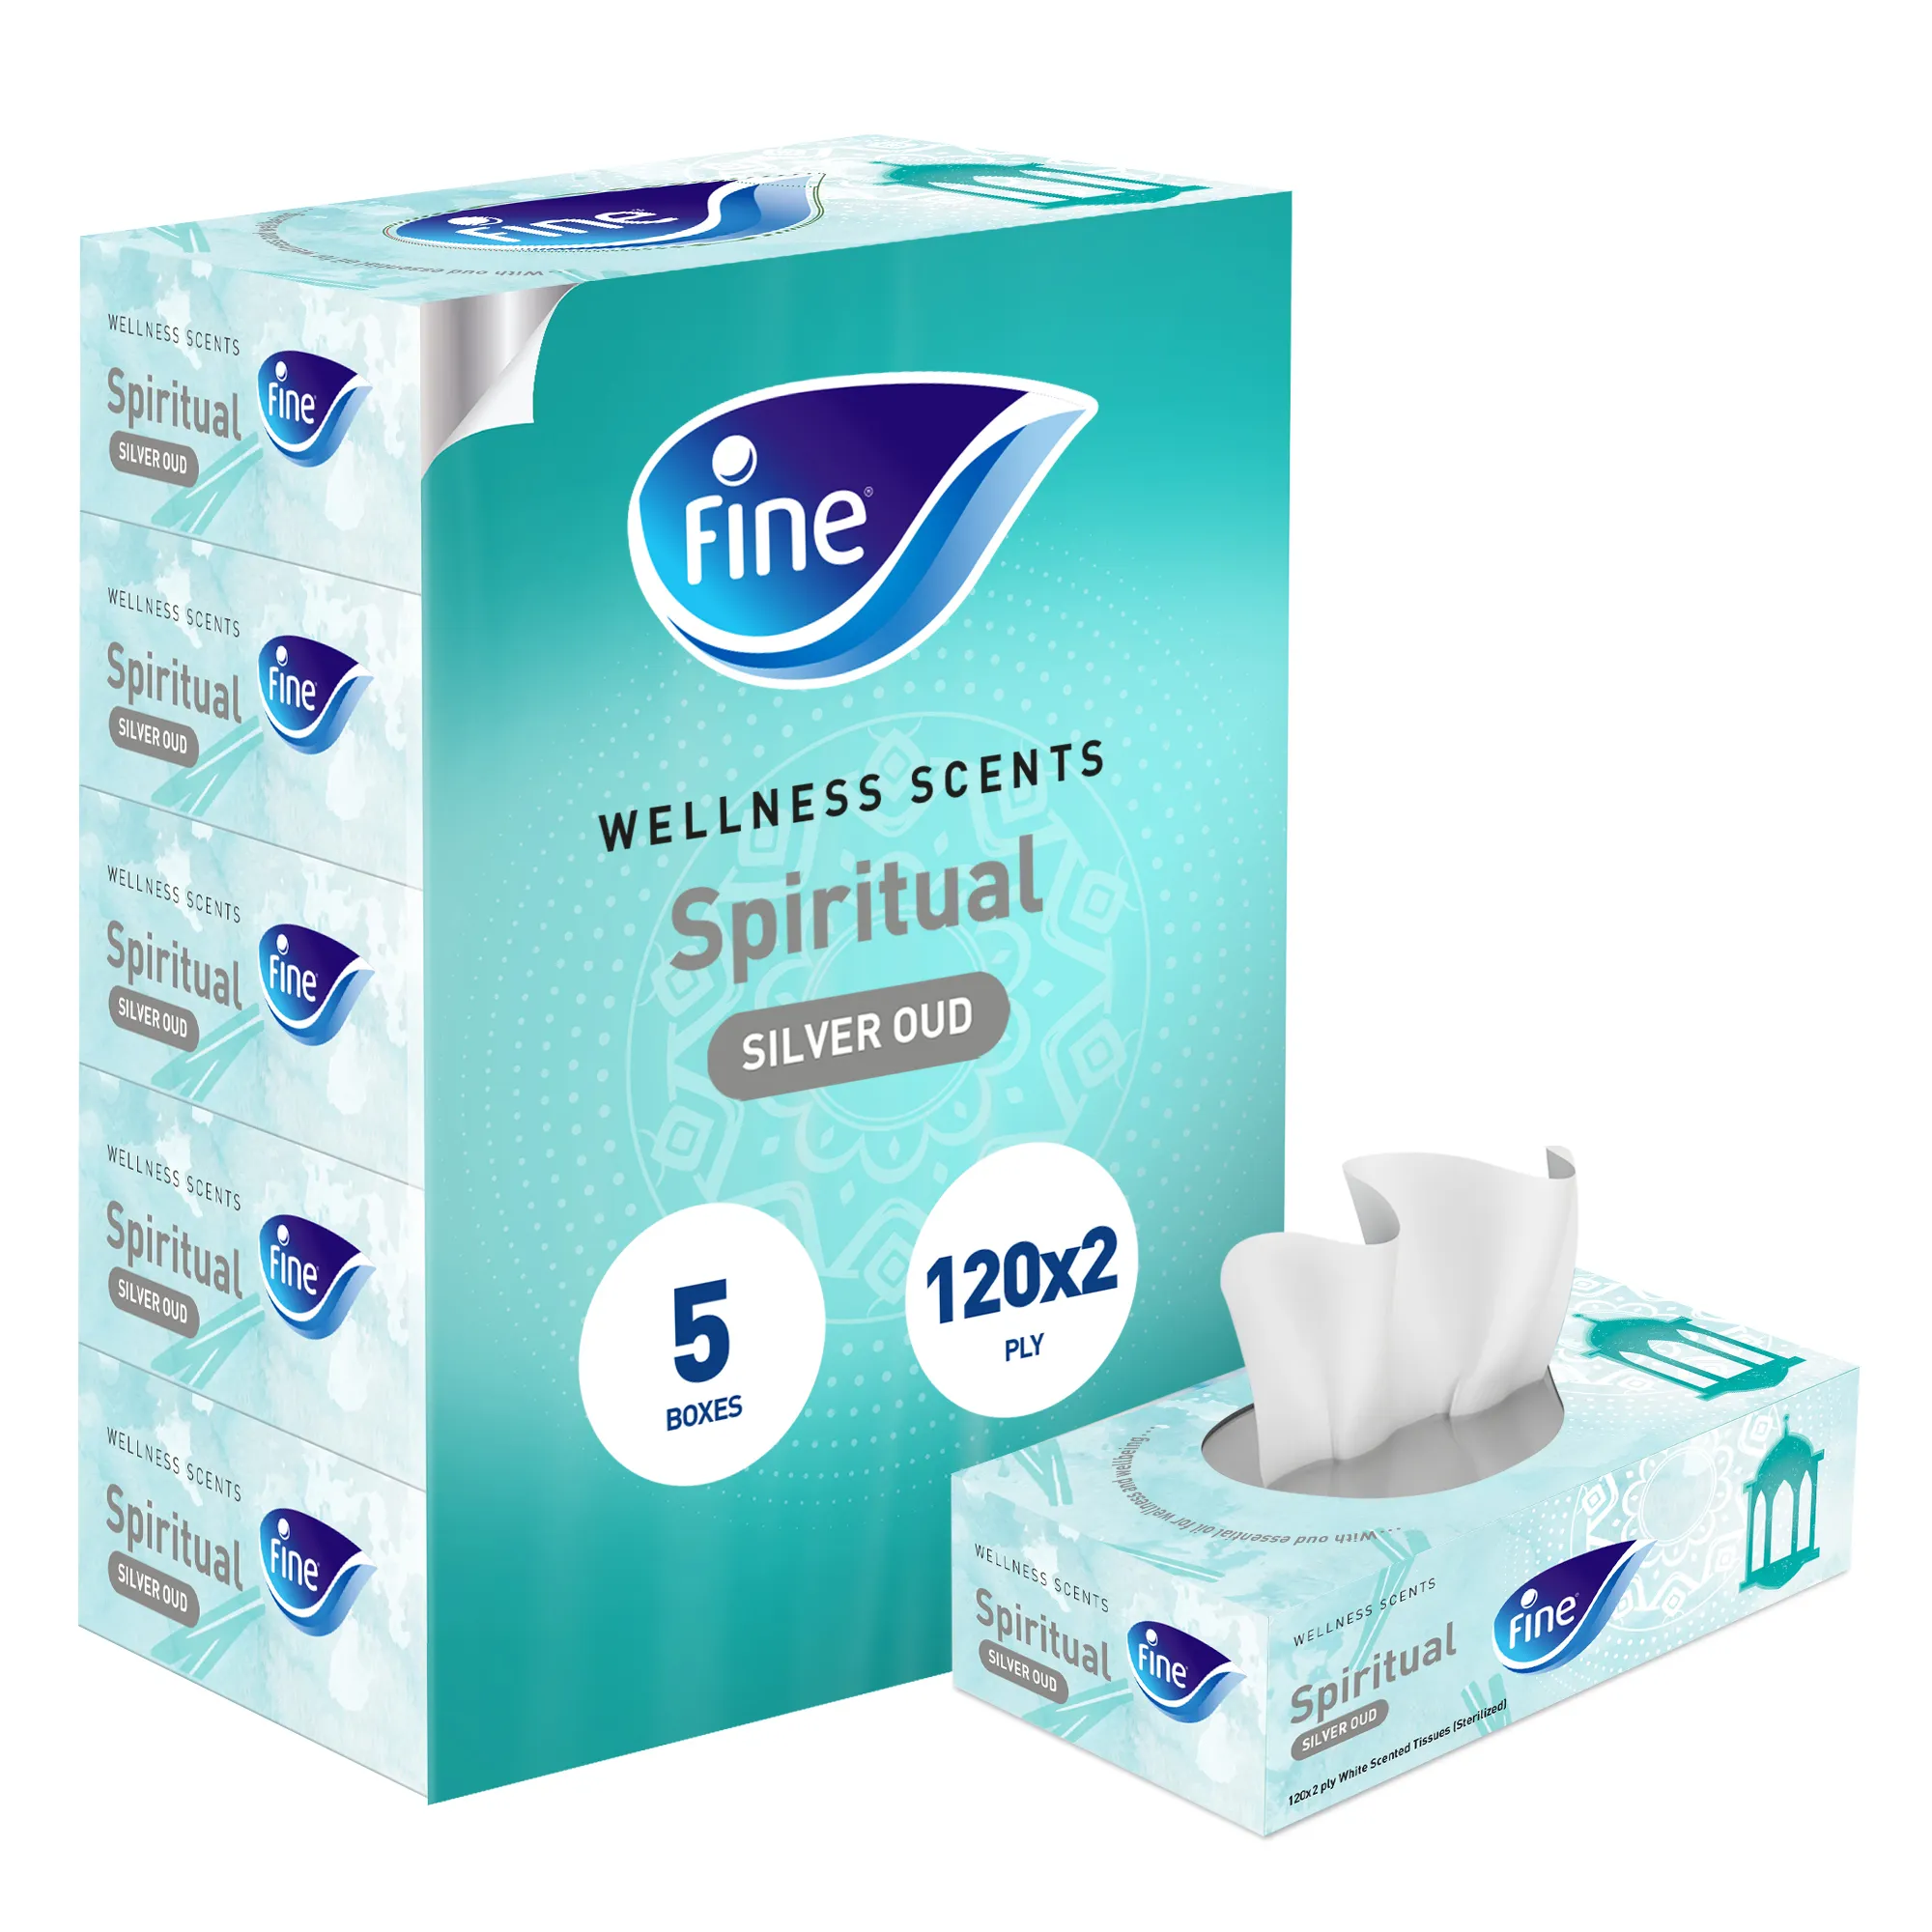 Fine, Facial Tissues, Wellness Scents Spiritual, Silver Oud, 120X2 Ply White Tissues, Pack of 5